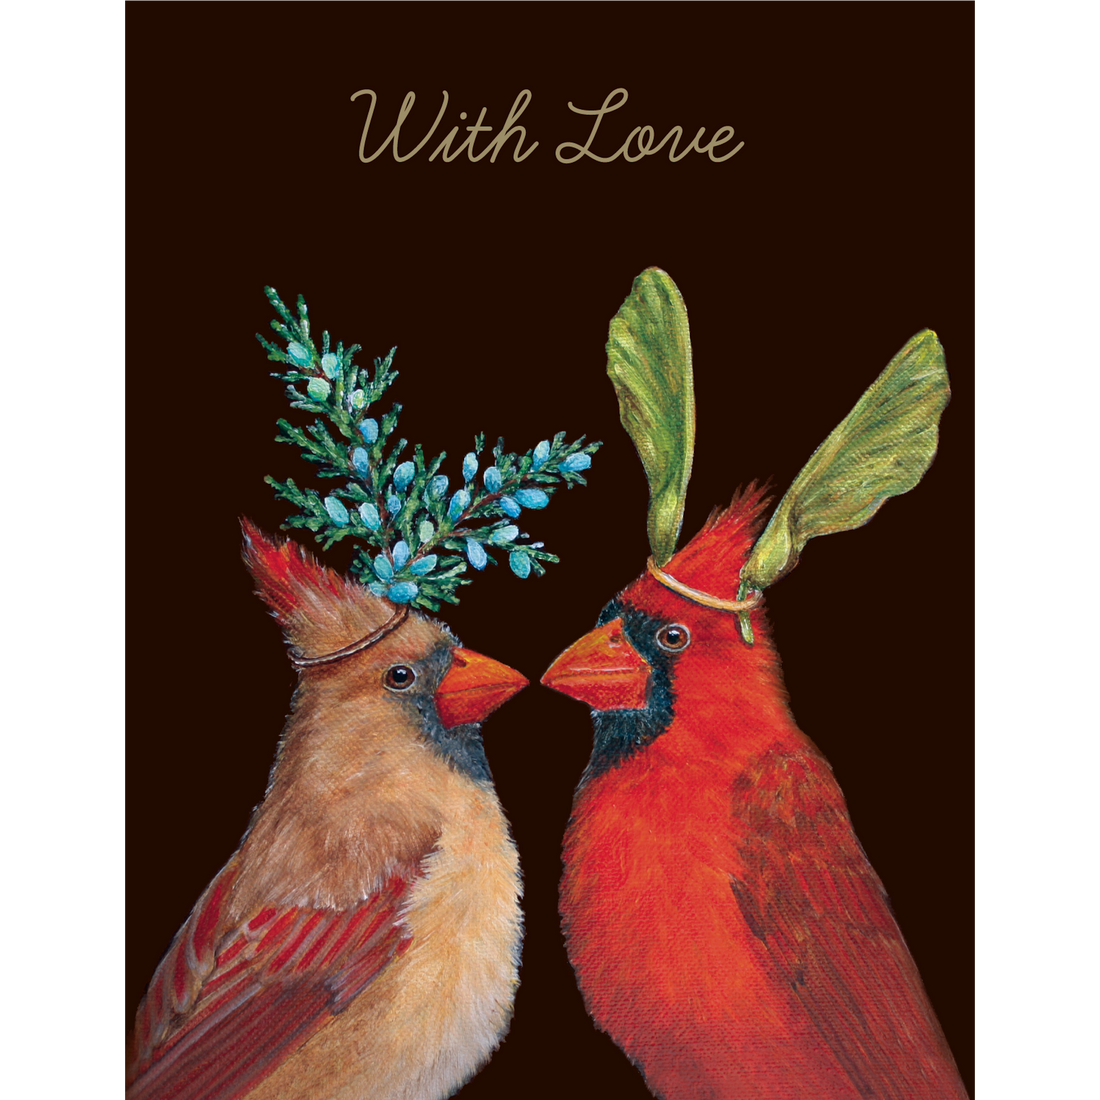 A stunning artwork by Vicki Sawyer featuring two Cardinal Love Cards adorned with holly berries on their heads by Hester &amp; Cook.